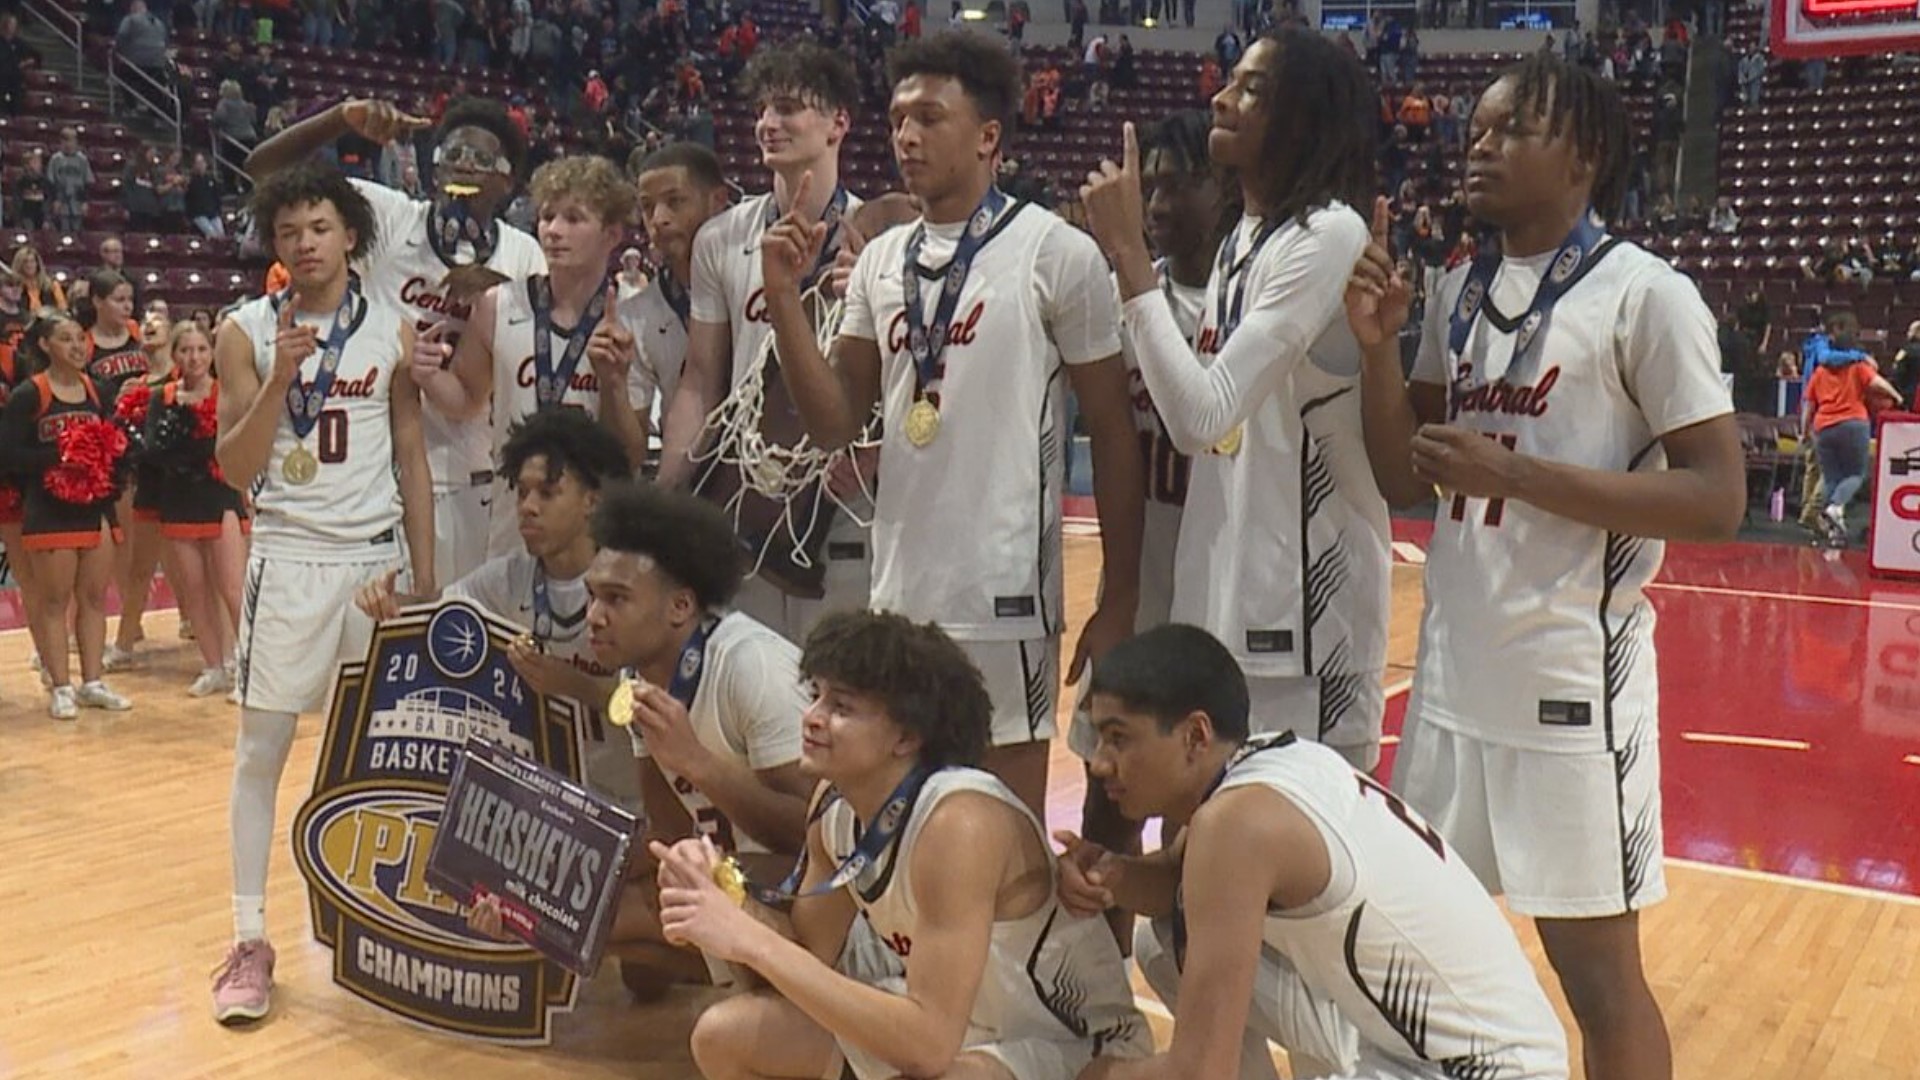 Central York becomes the first-ever York-Adams league public school to win a state title in boys' or girls' basketball.